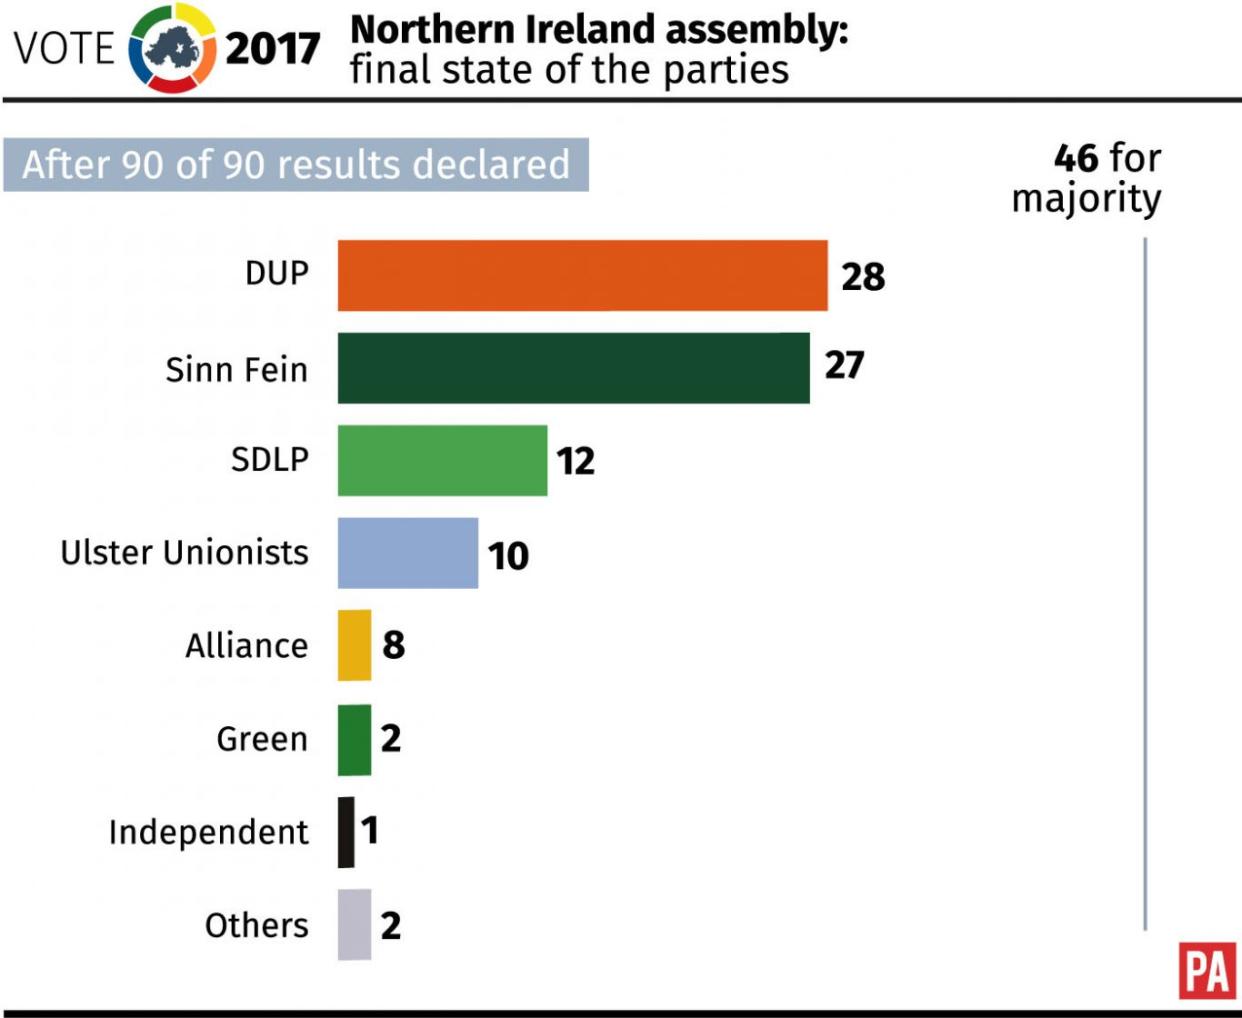 Northern Ireland assembly: final state of the parties